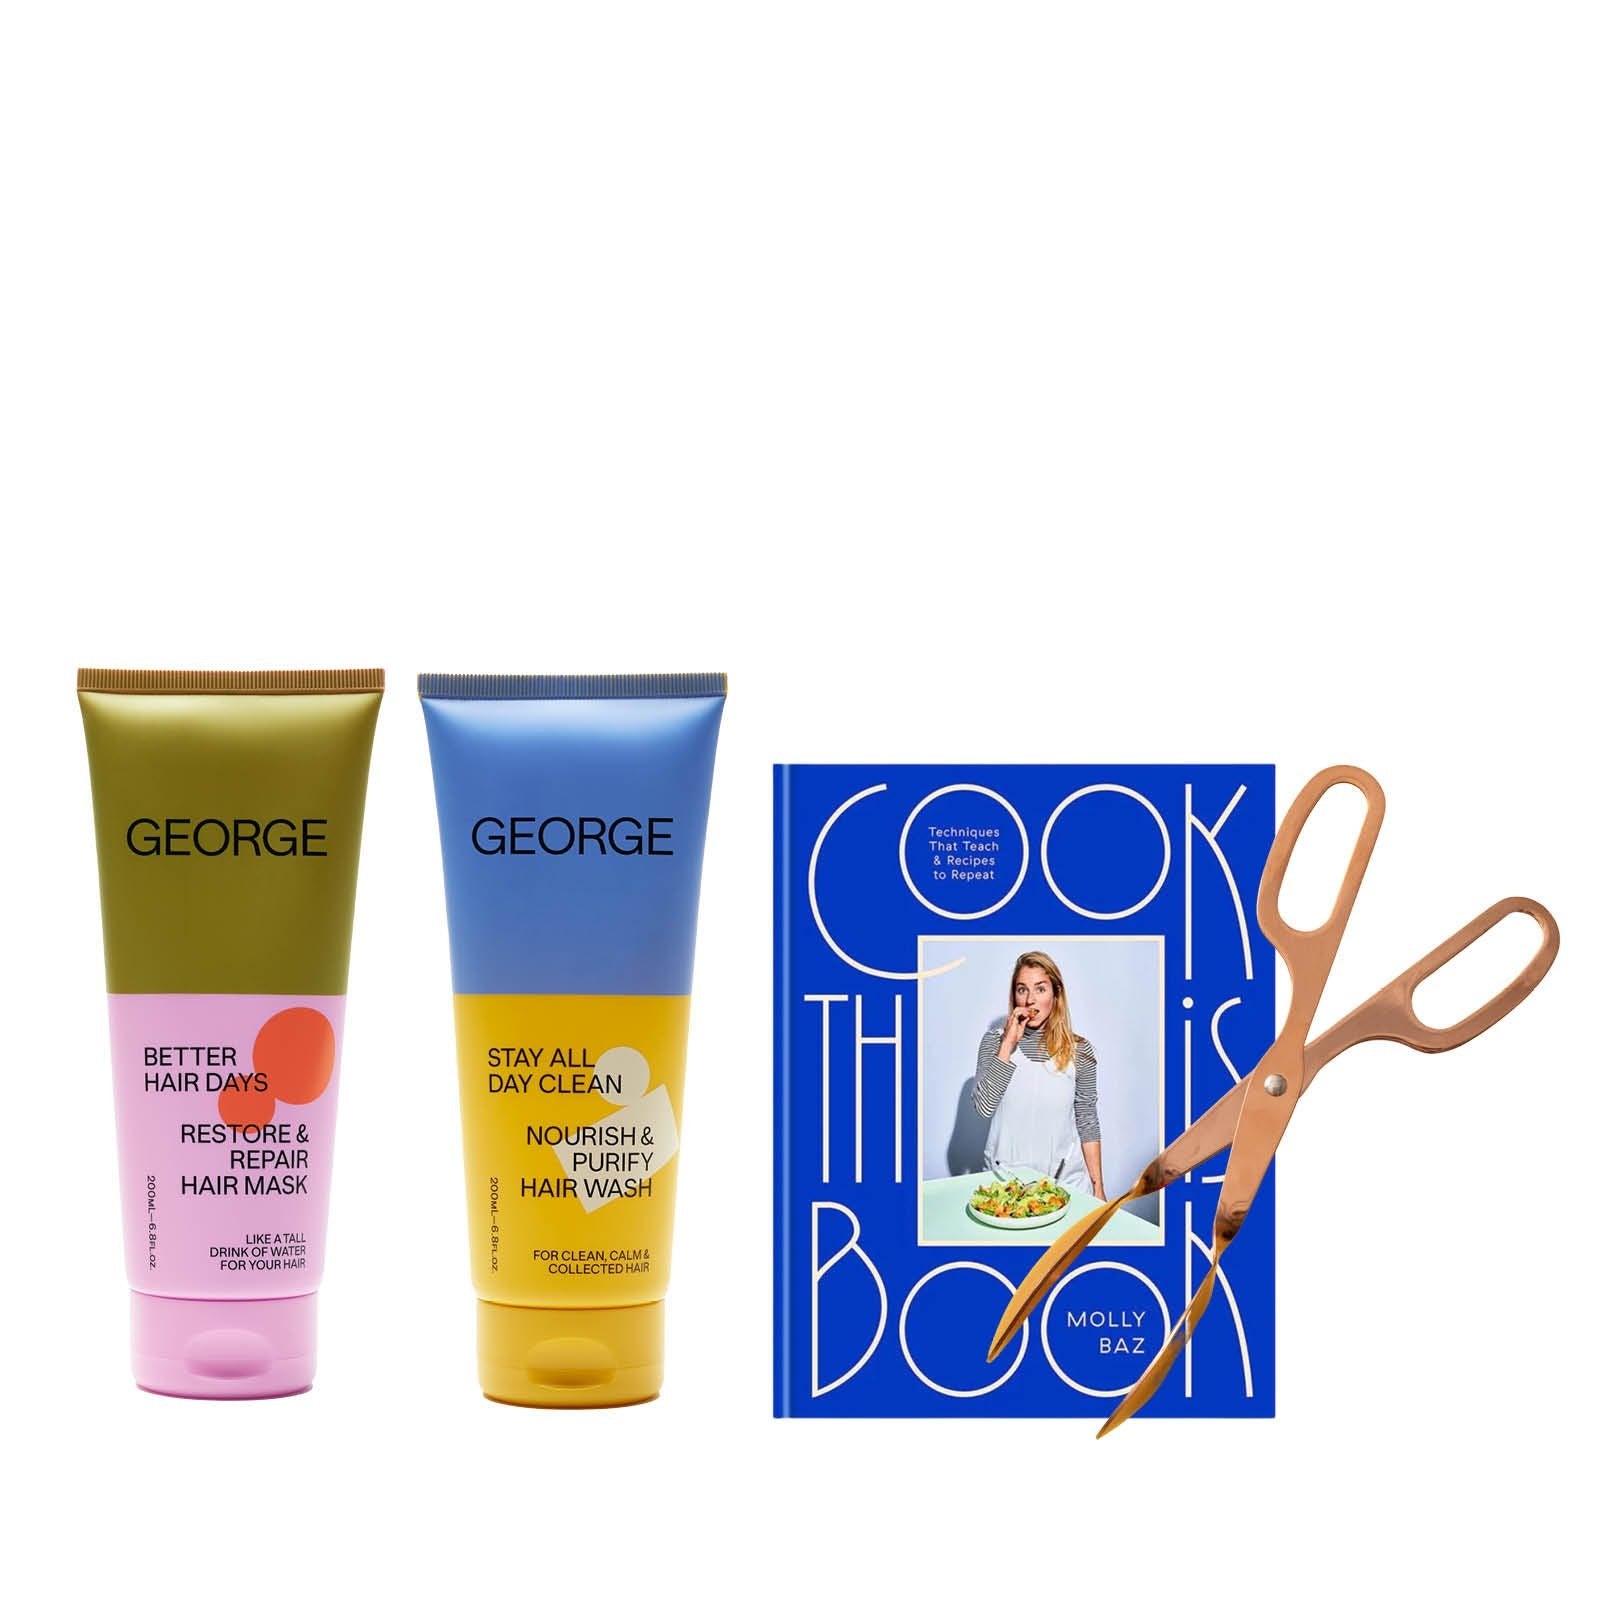 Dinner Party Mum - George Haircare